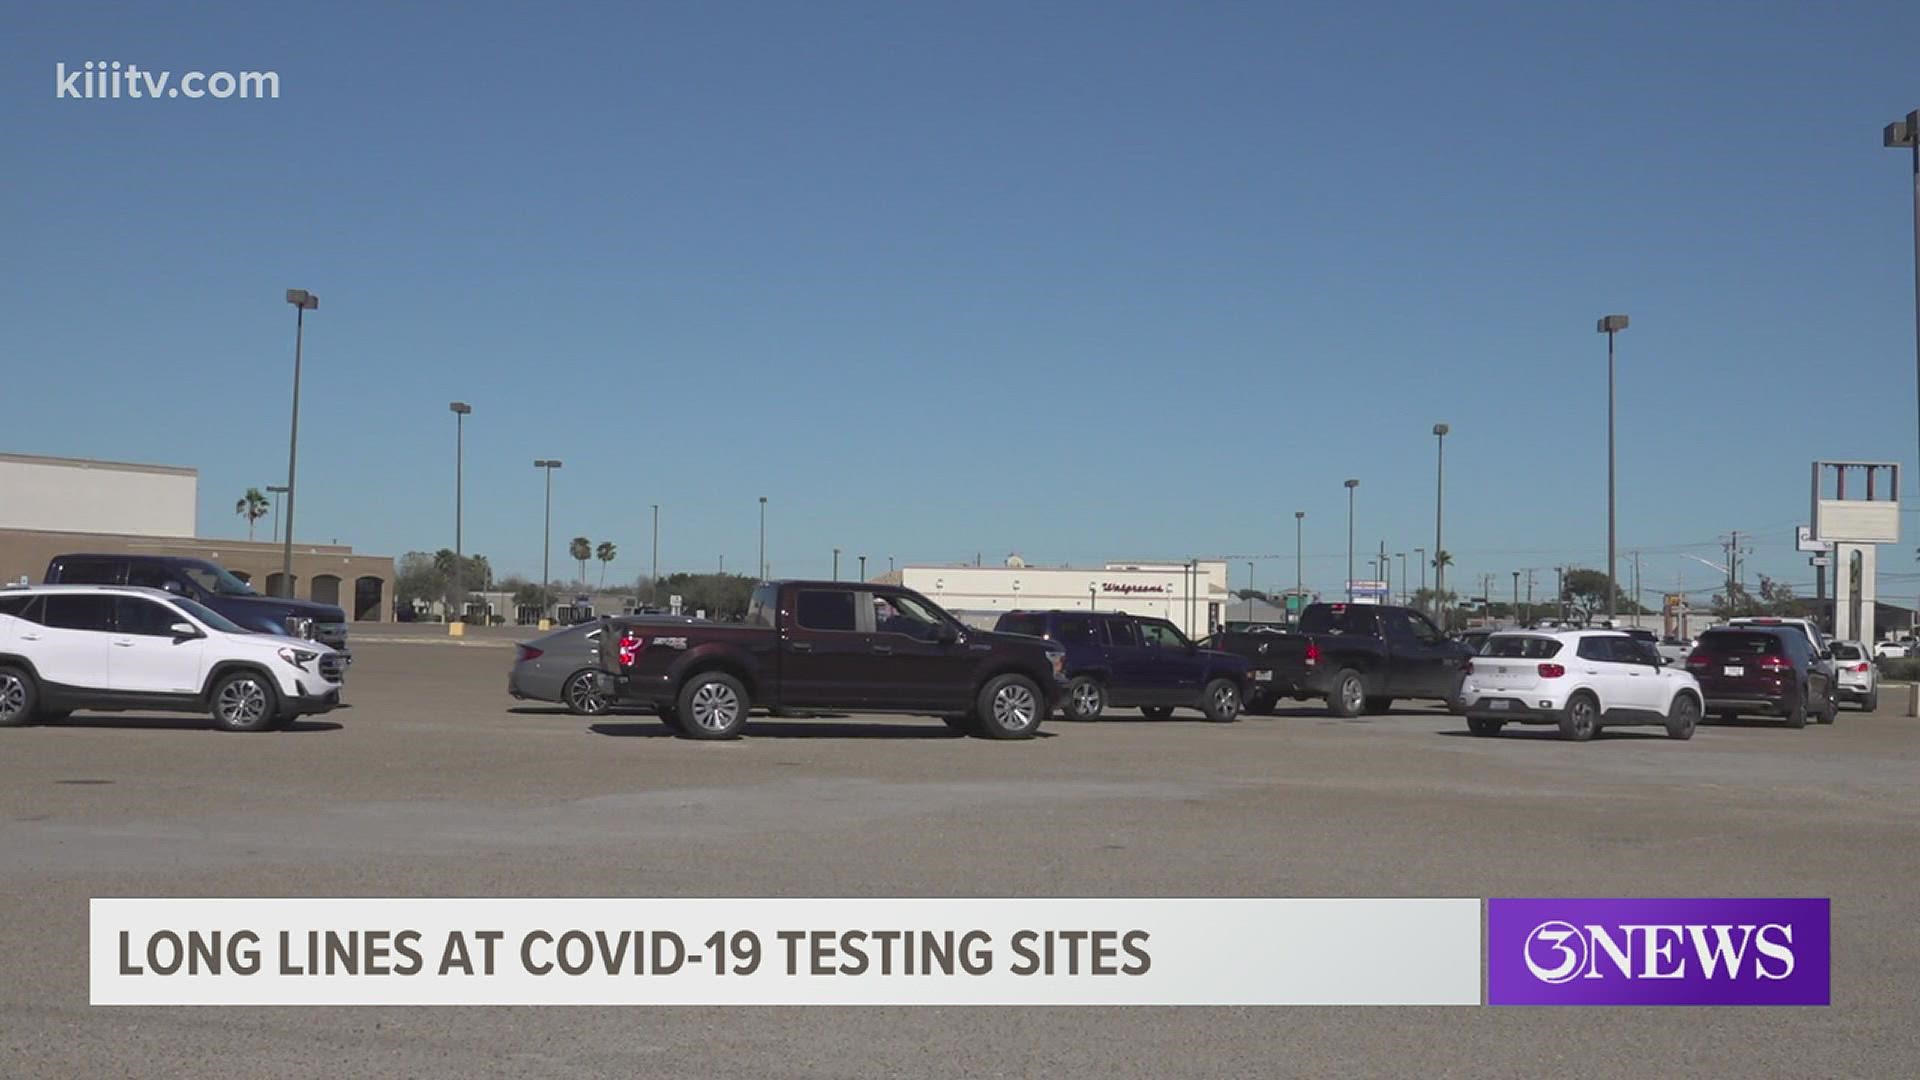 3News' Julissa Garza breaks down why lines have been growing increasingly long at local testing sites.